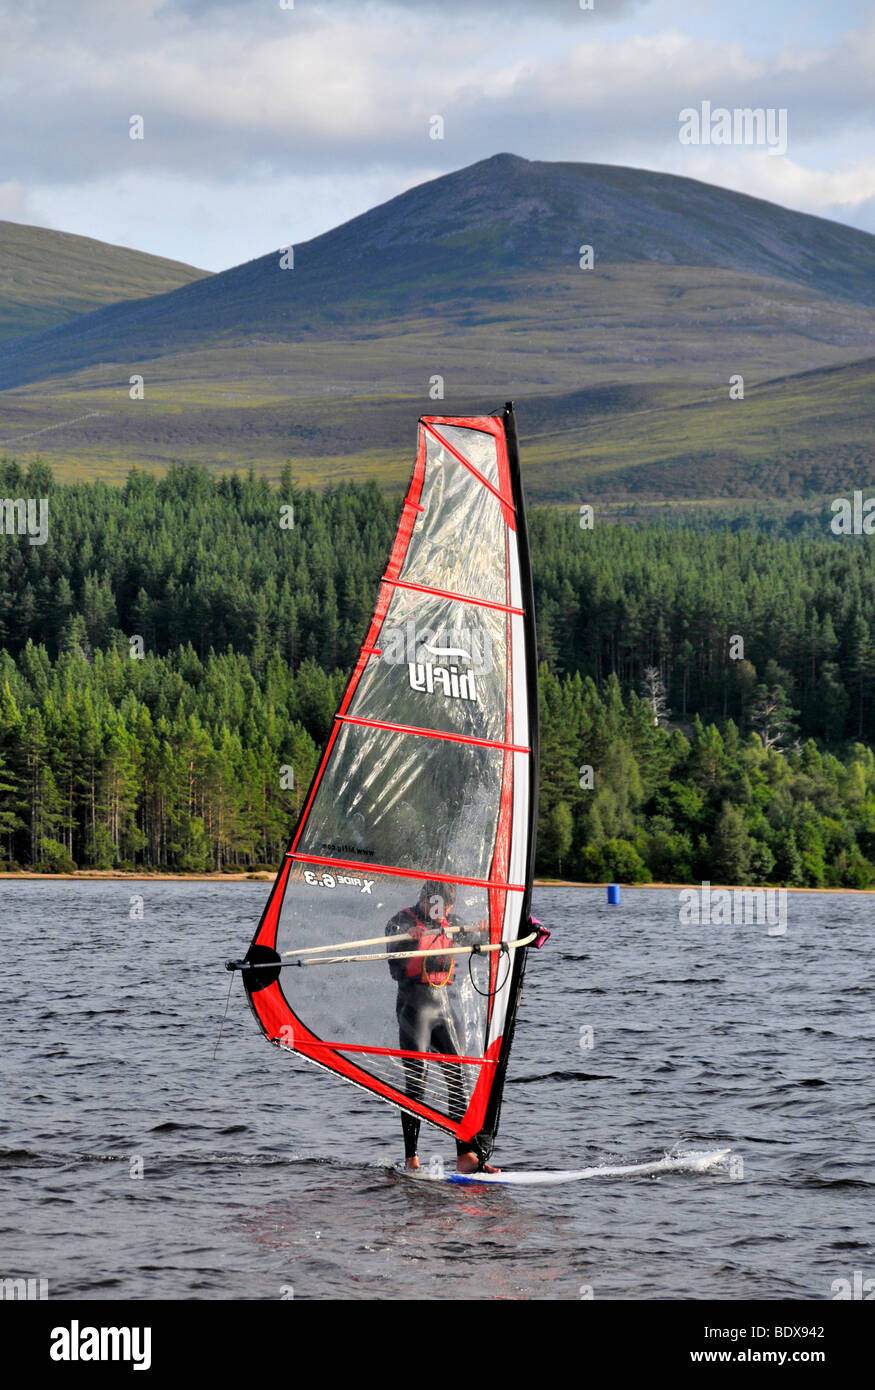 A man windsurfing on Loch Morlich, near Aviemore, with the Cairngorms in the background. Stock Photo